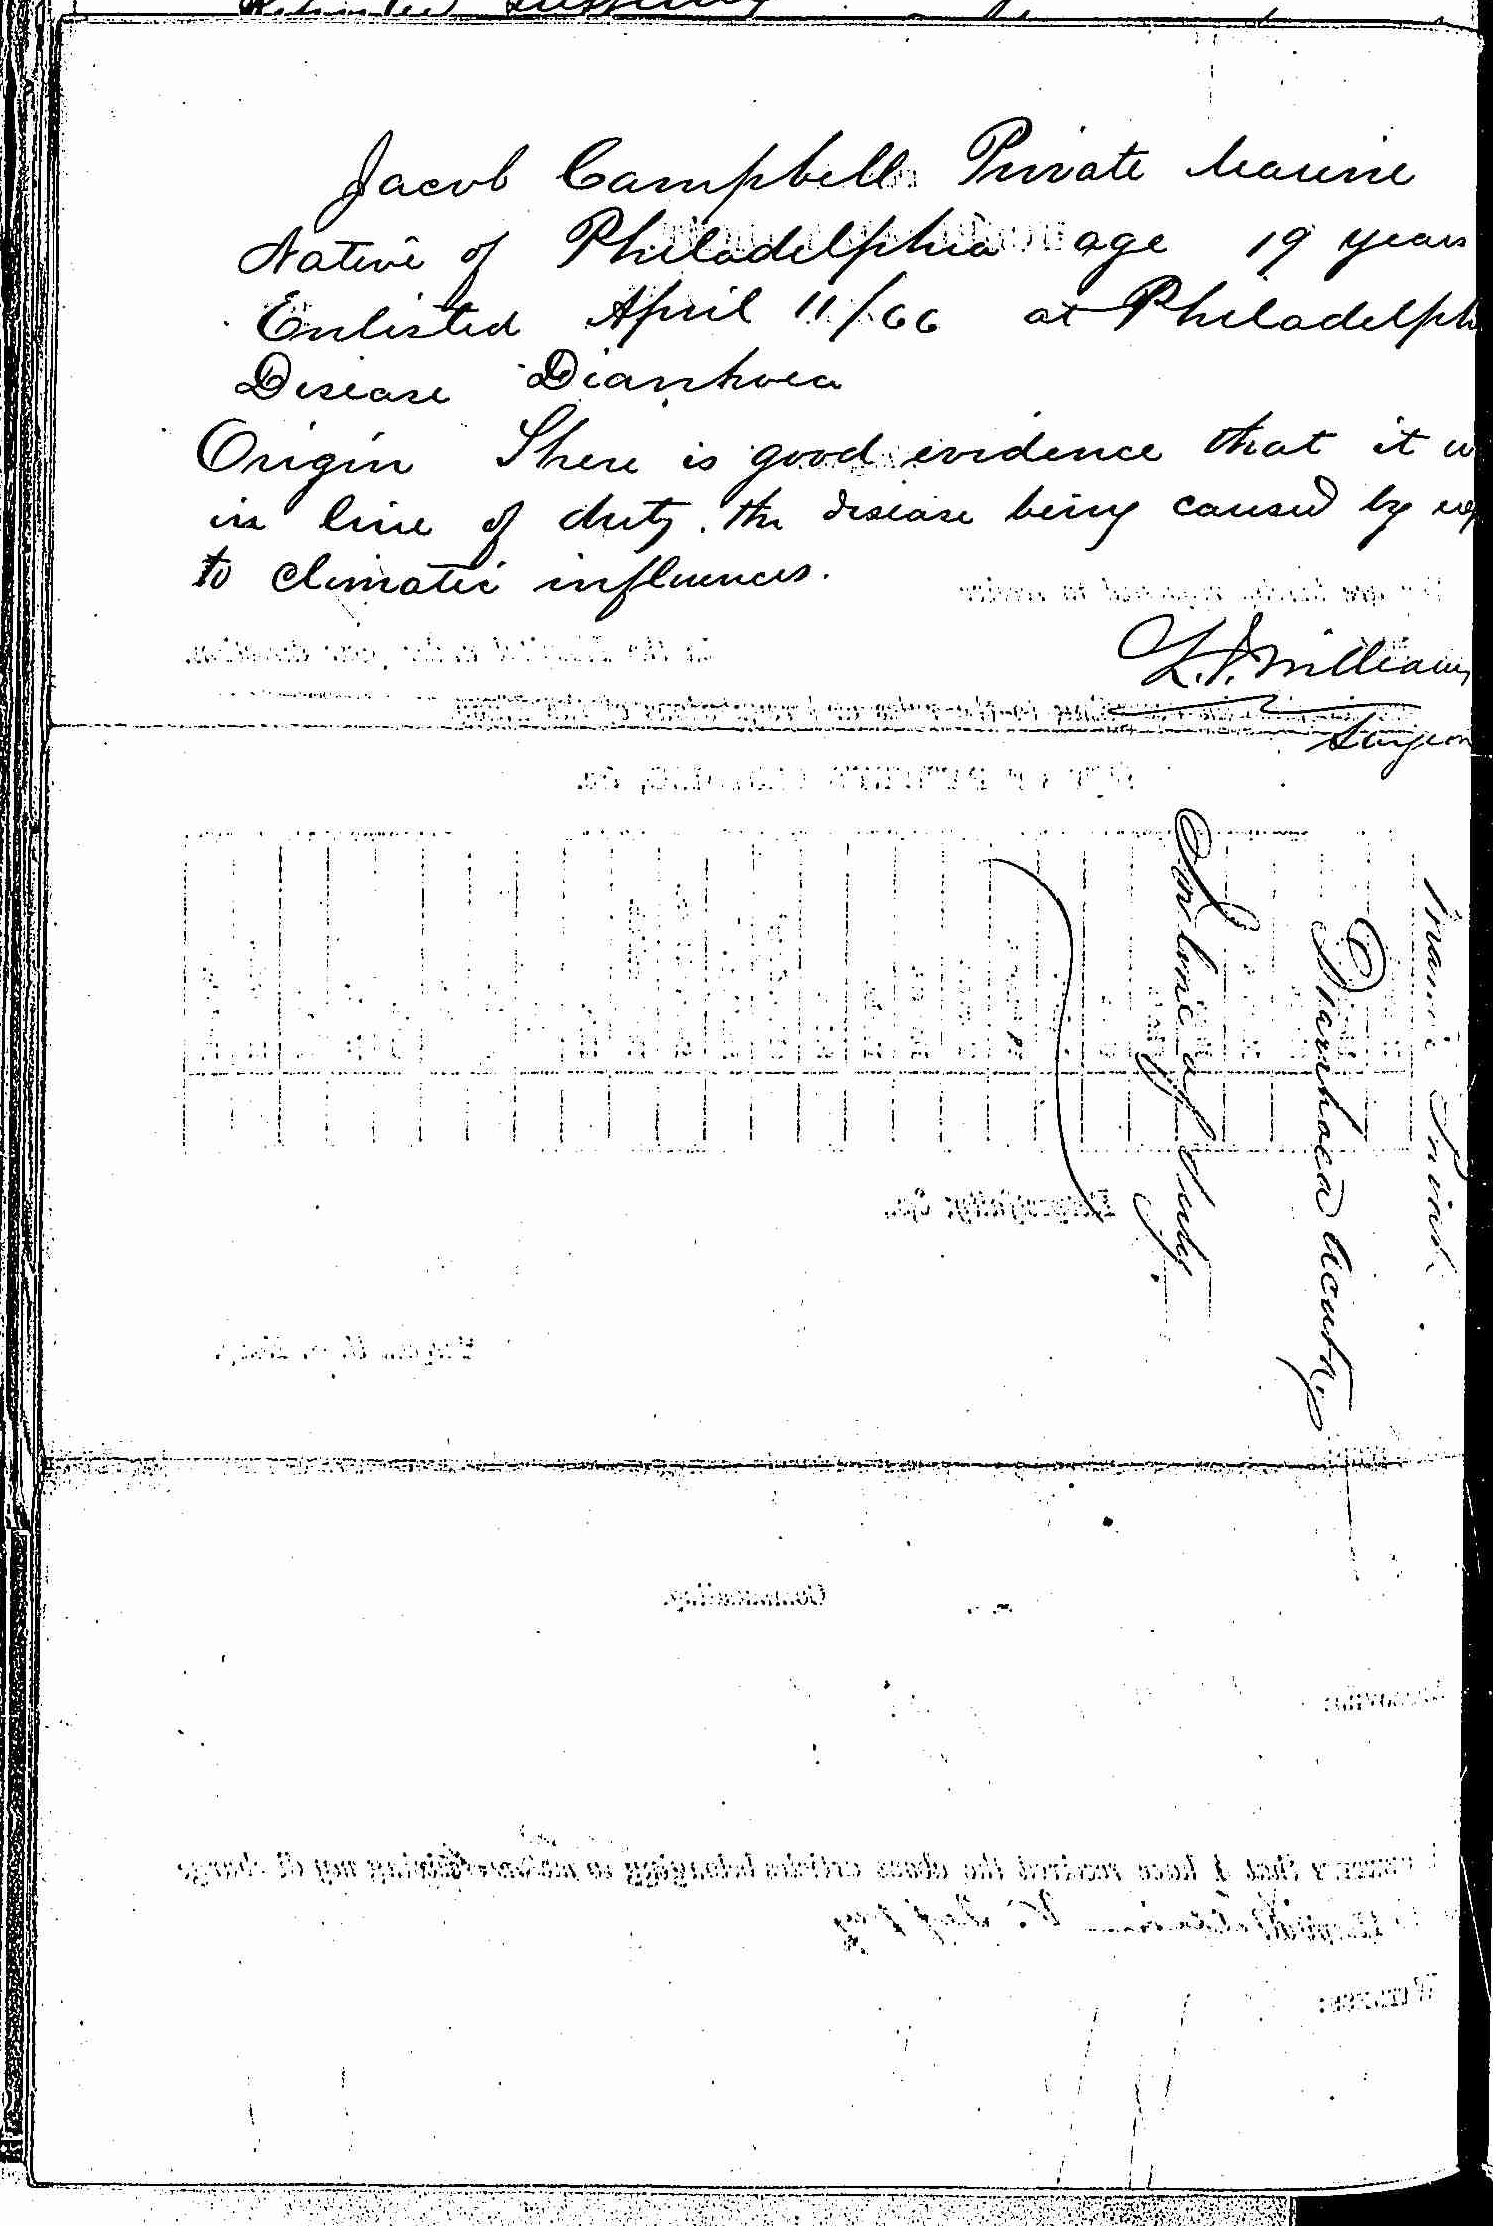 Entry for Jacob Campbell (page 2 of 2) in the log Hospital Tickets and Case Papers - Naval Hospital - Washington, D.C. - 1866-68